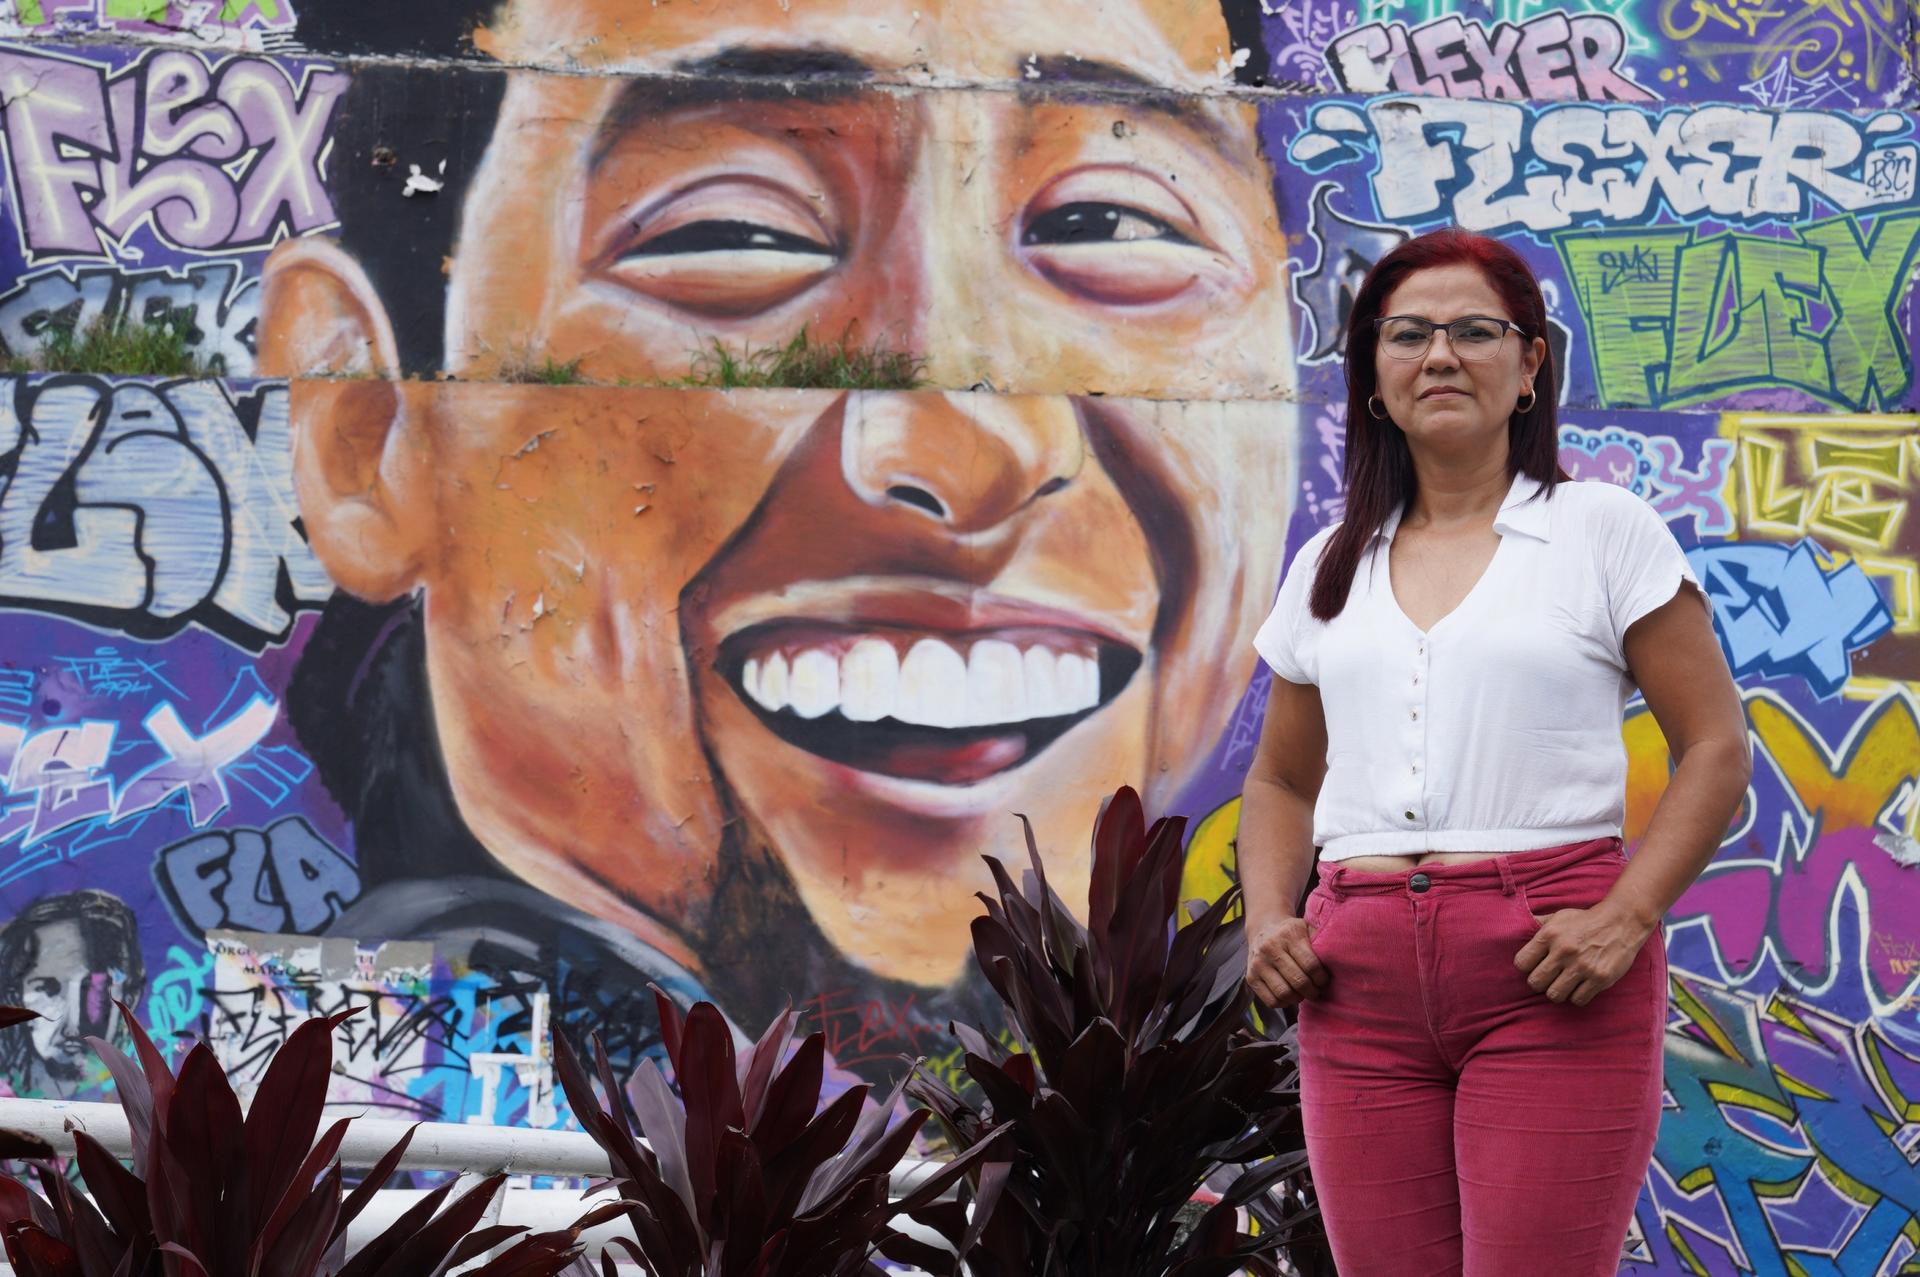 Laura Guerrero, poses for a photo next to a mural in Cali, that depicts her son, Nicolas Guerero